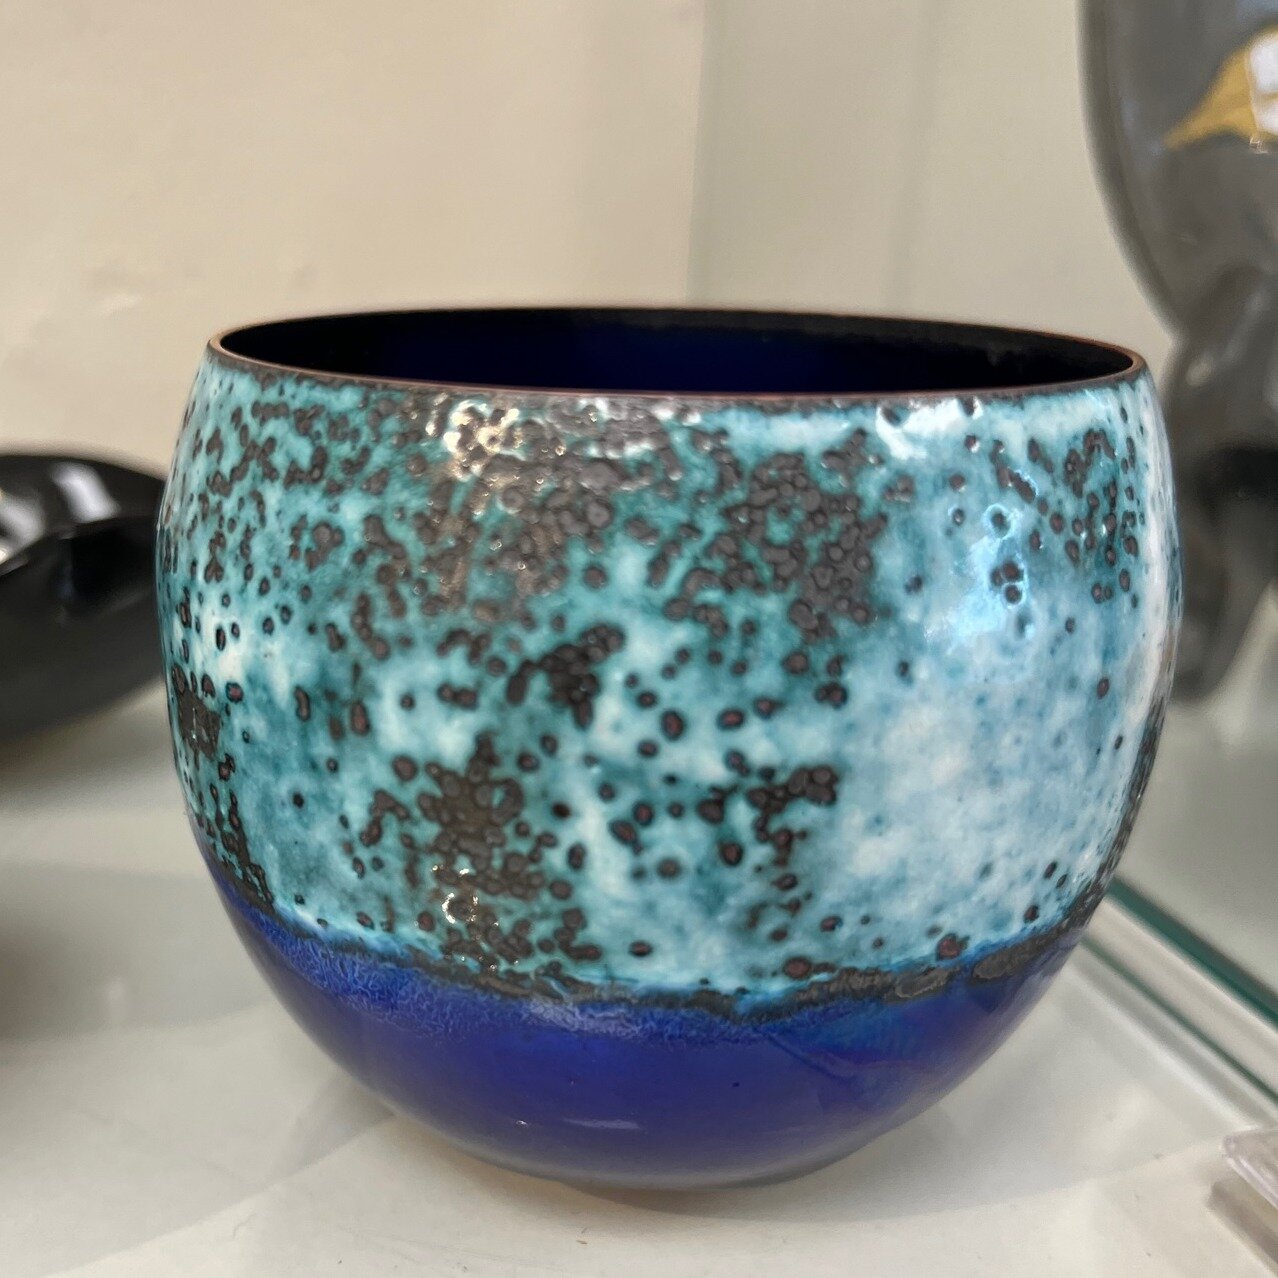 🌟 Exciting Class Alert! 🎨✨ Join us at the Creative Arts Center for a unique experience with Carol Whaley in &quot;Basic Fundamentals of Enameling on Copper.&quot; 🌈✨

📅 2 Days: with flexible dates, call to arrange dates that work for you!
🕒 3-5p